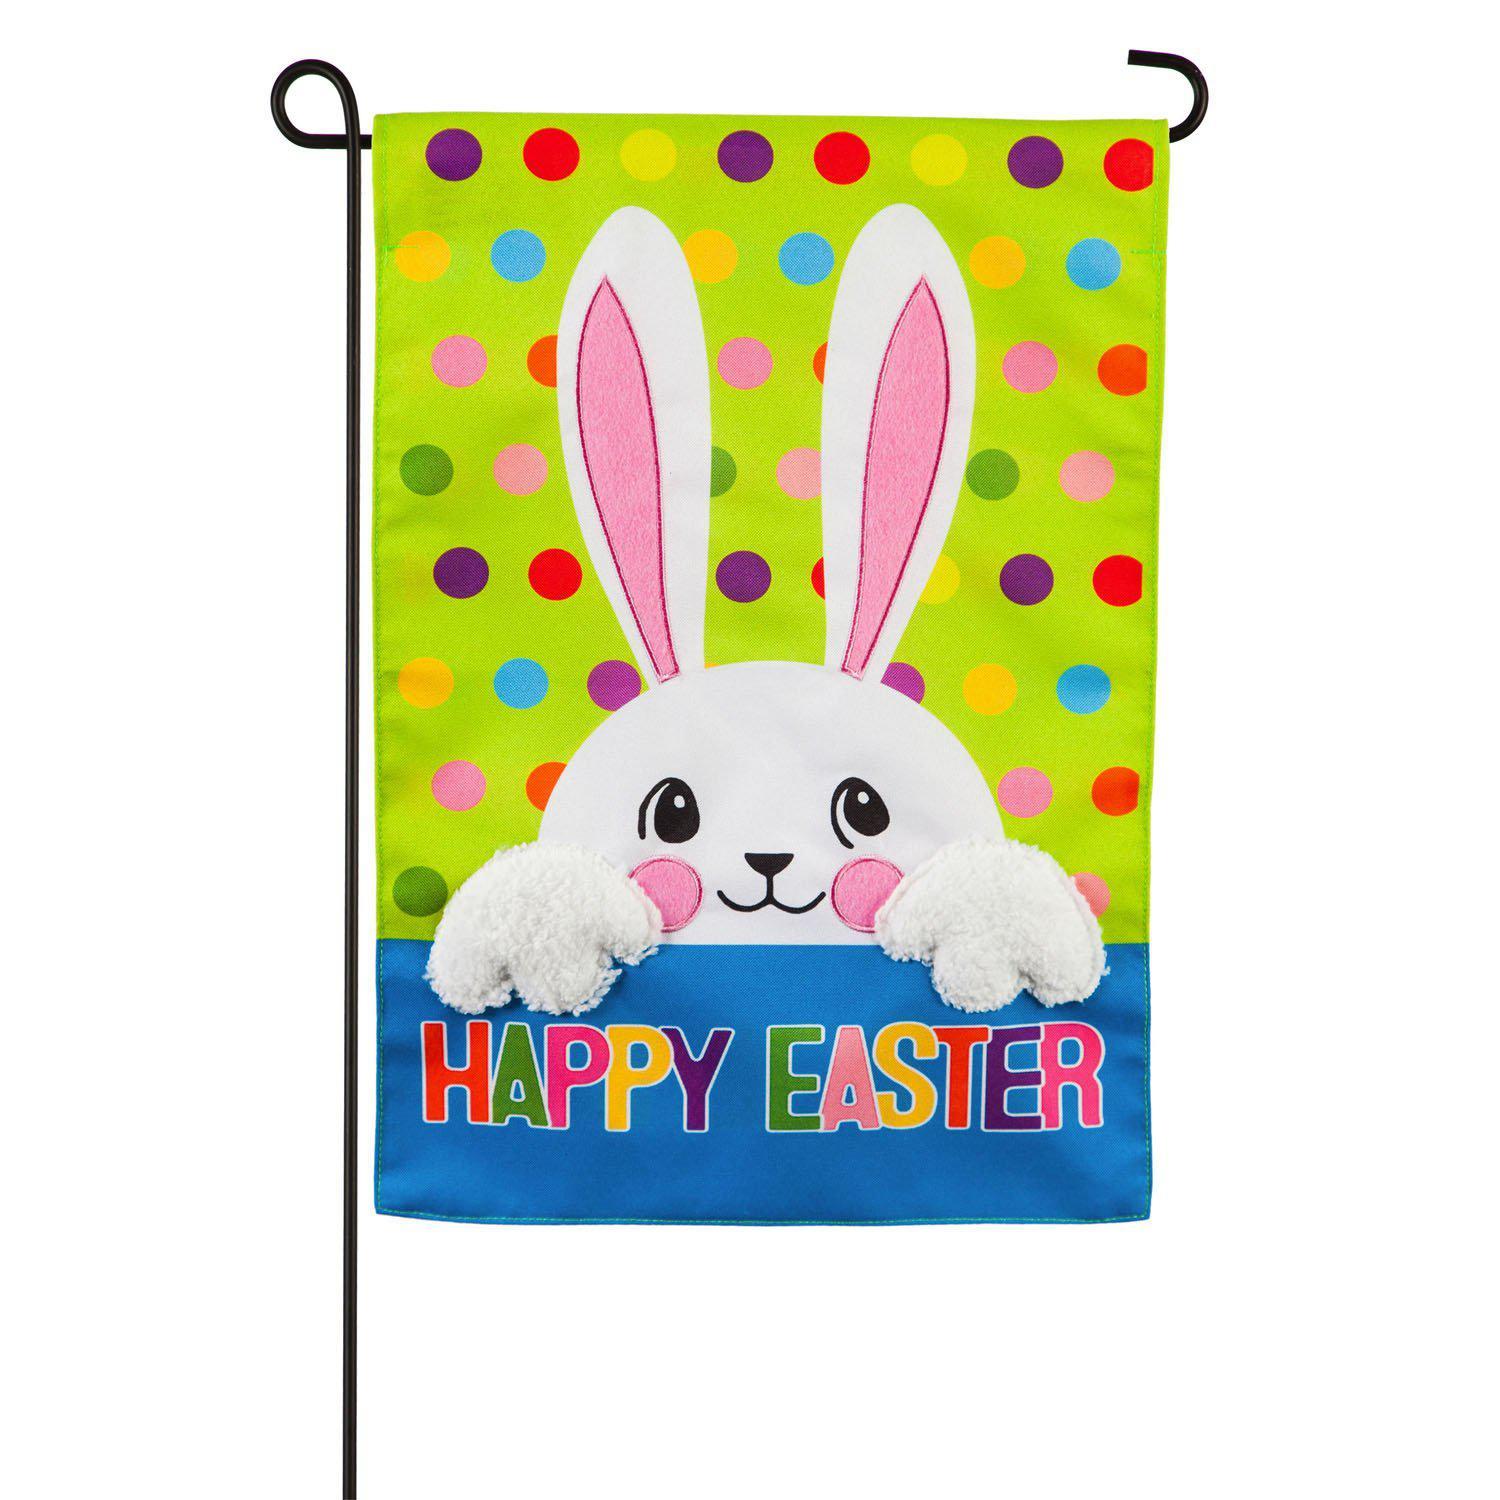 The Polka Dot Easter Bunny garden flag features a fuzzy white bunny over a brightly colored background with polka dots and the words "Happy Easter".